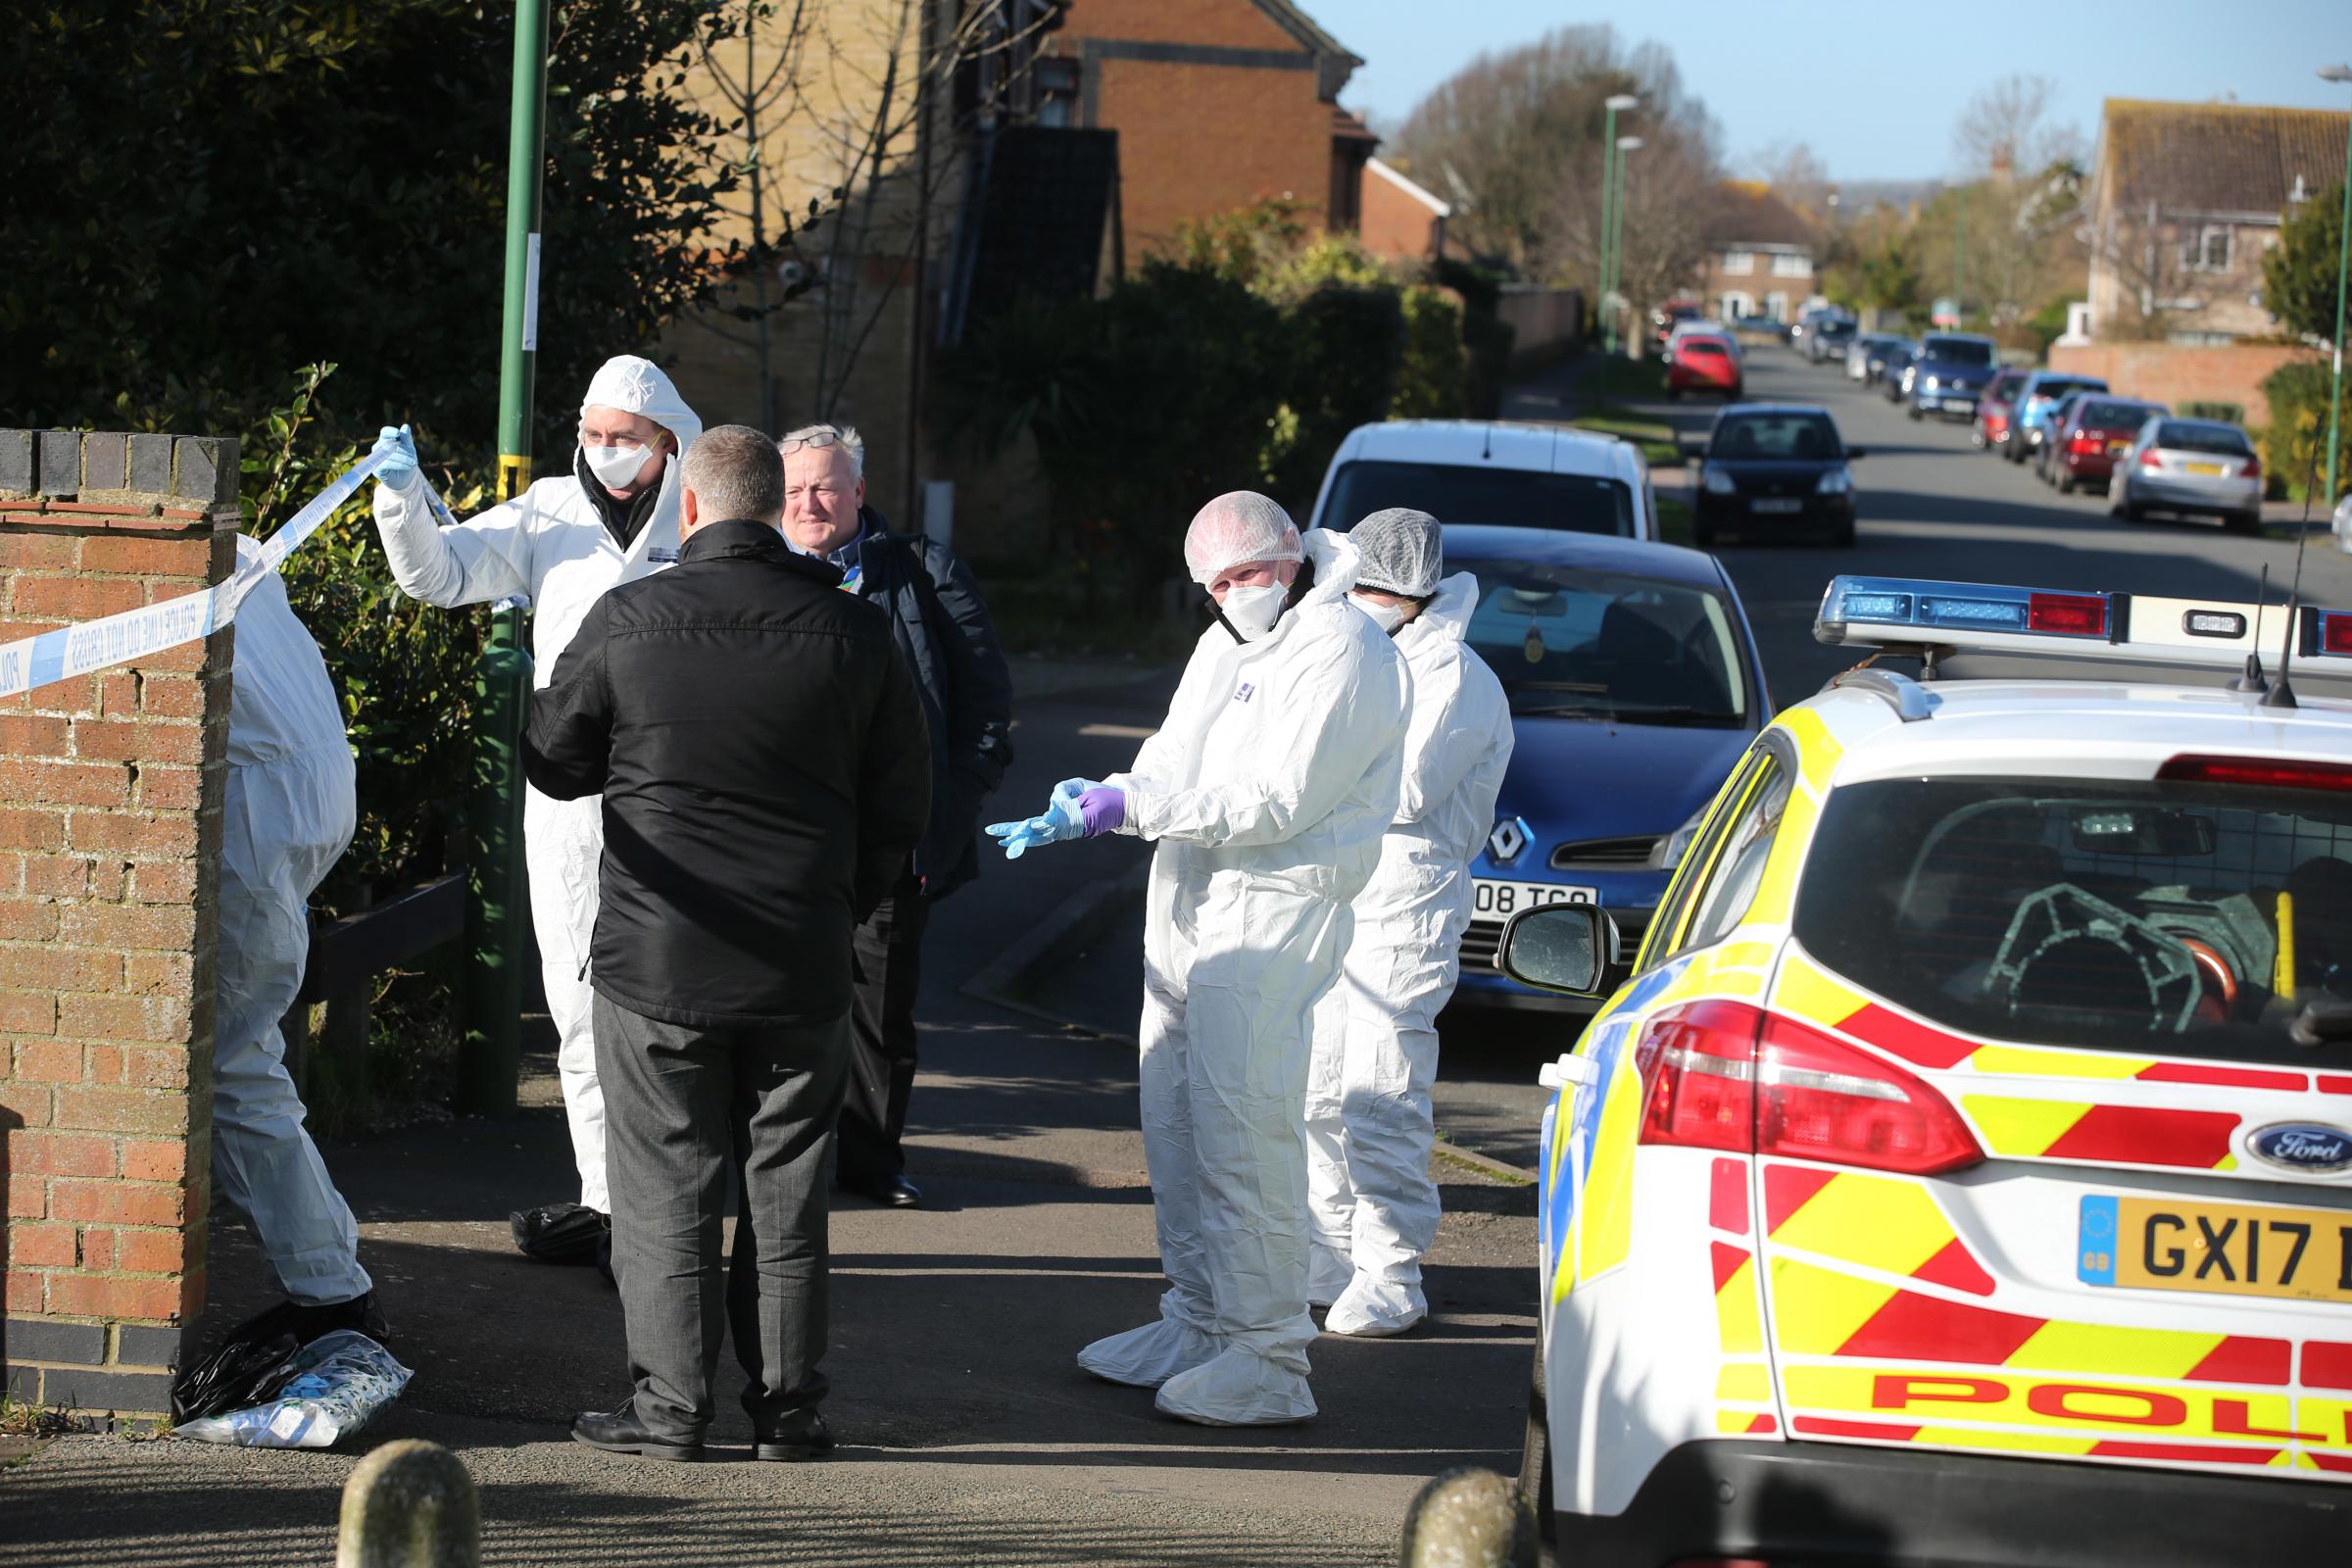 The scene in Nicolson Drive, Shoreham. Jordan Bell is accused of breaking into the home of David Evans in Shoreham and stabbing the man in front of his daughter as part of an aggravated gang burlgary